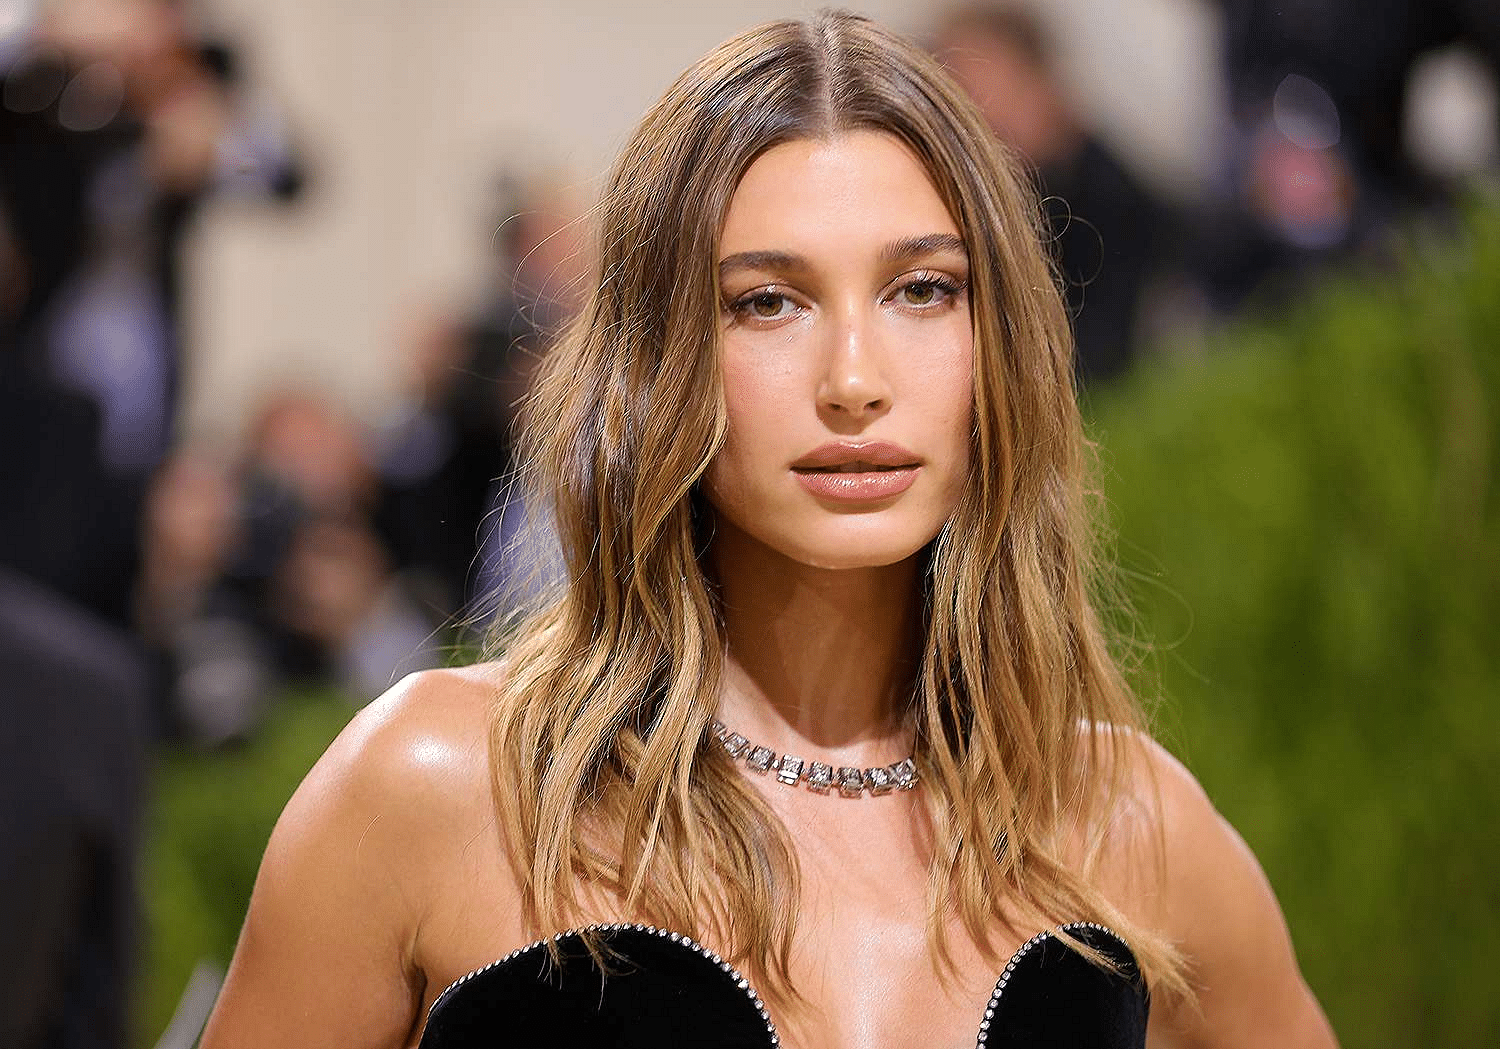 Hailey Bieber Uses This Ultra-Light Chanel Foundation for Glowy Skin